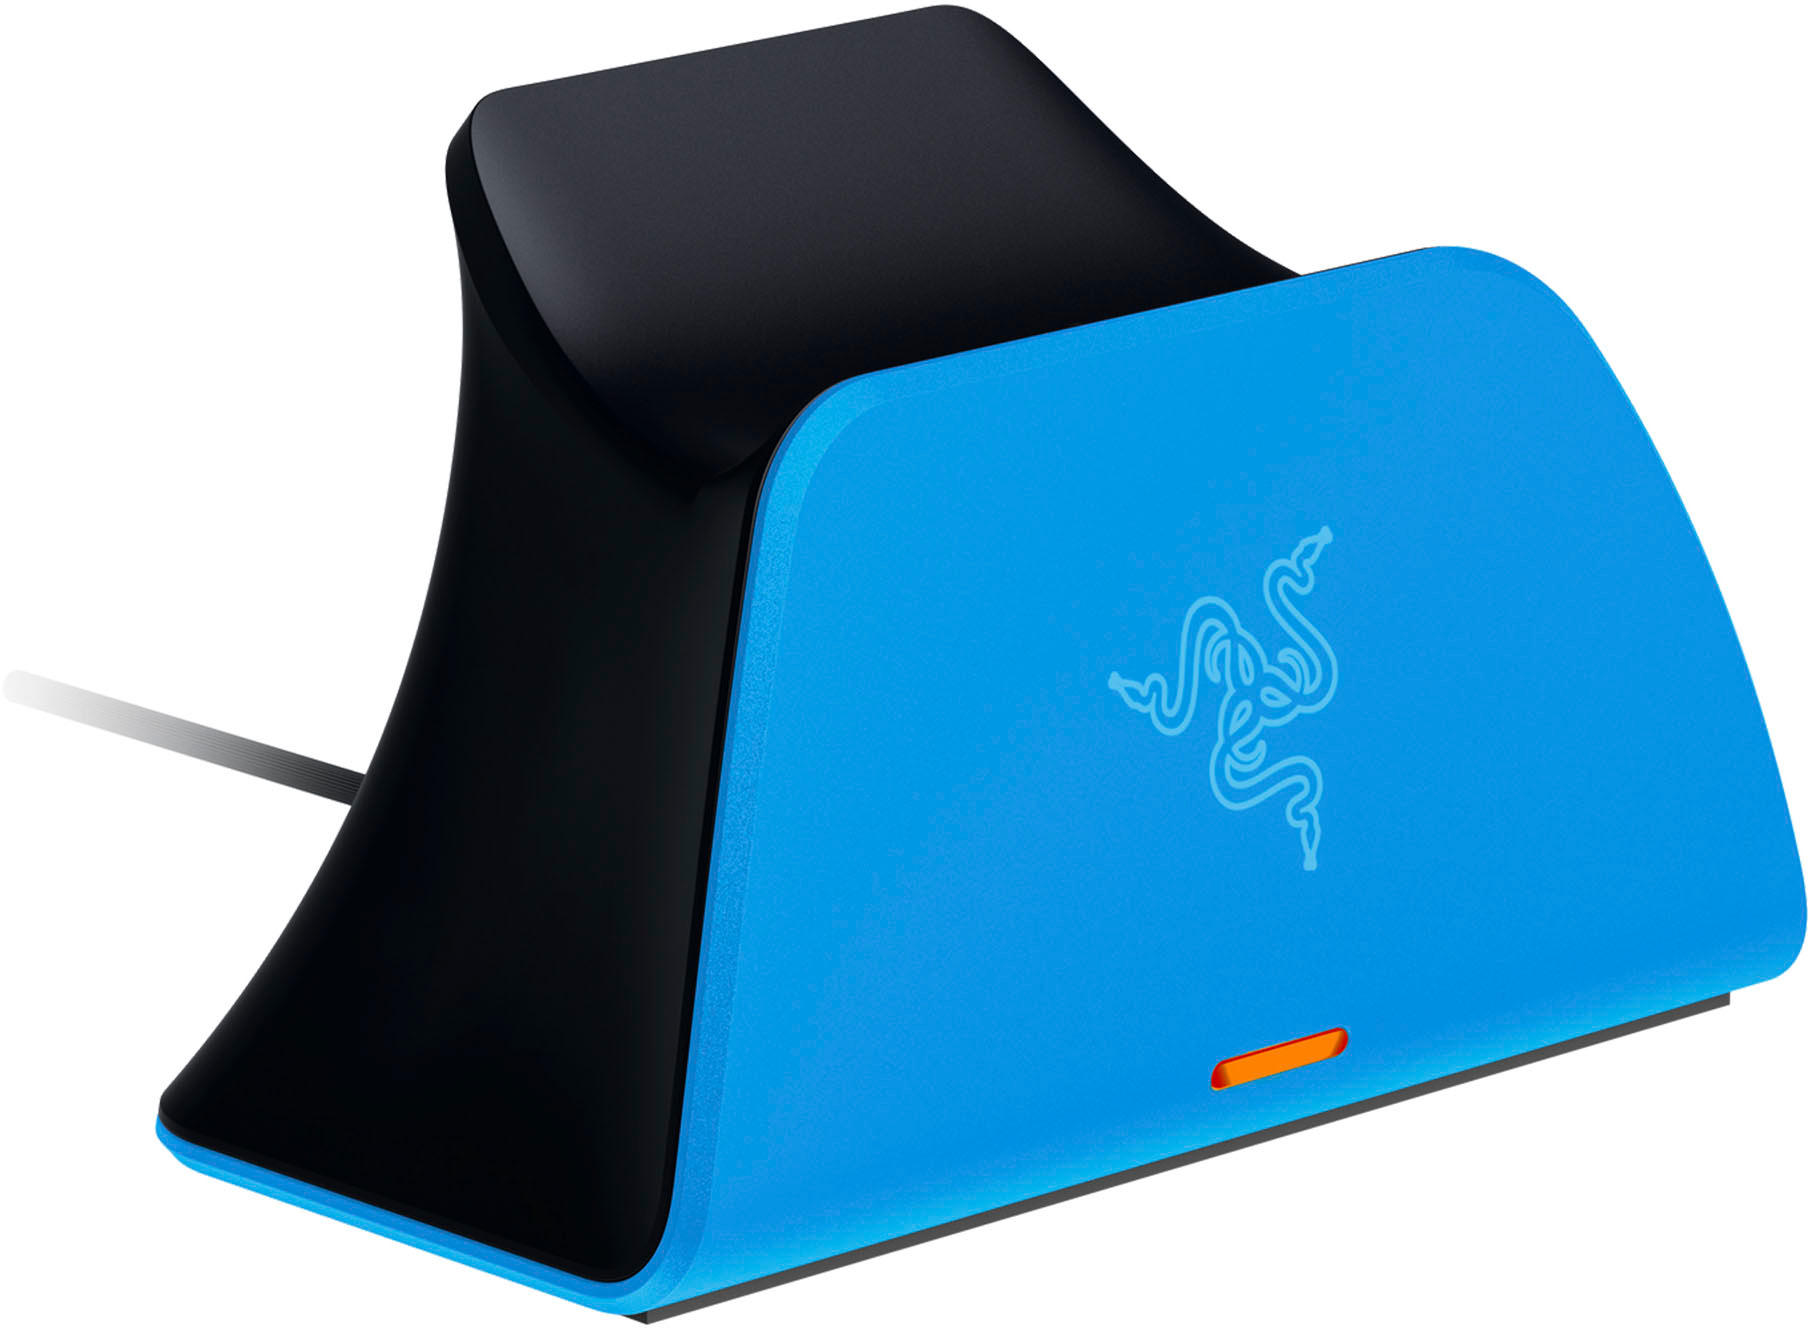  Razer Quick Charging Stand for PlayStation 5: Quick